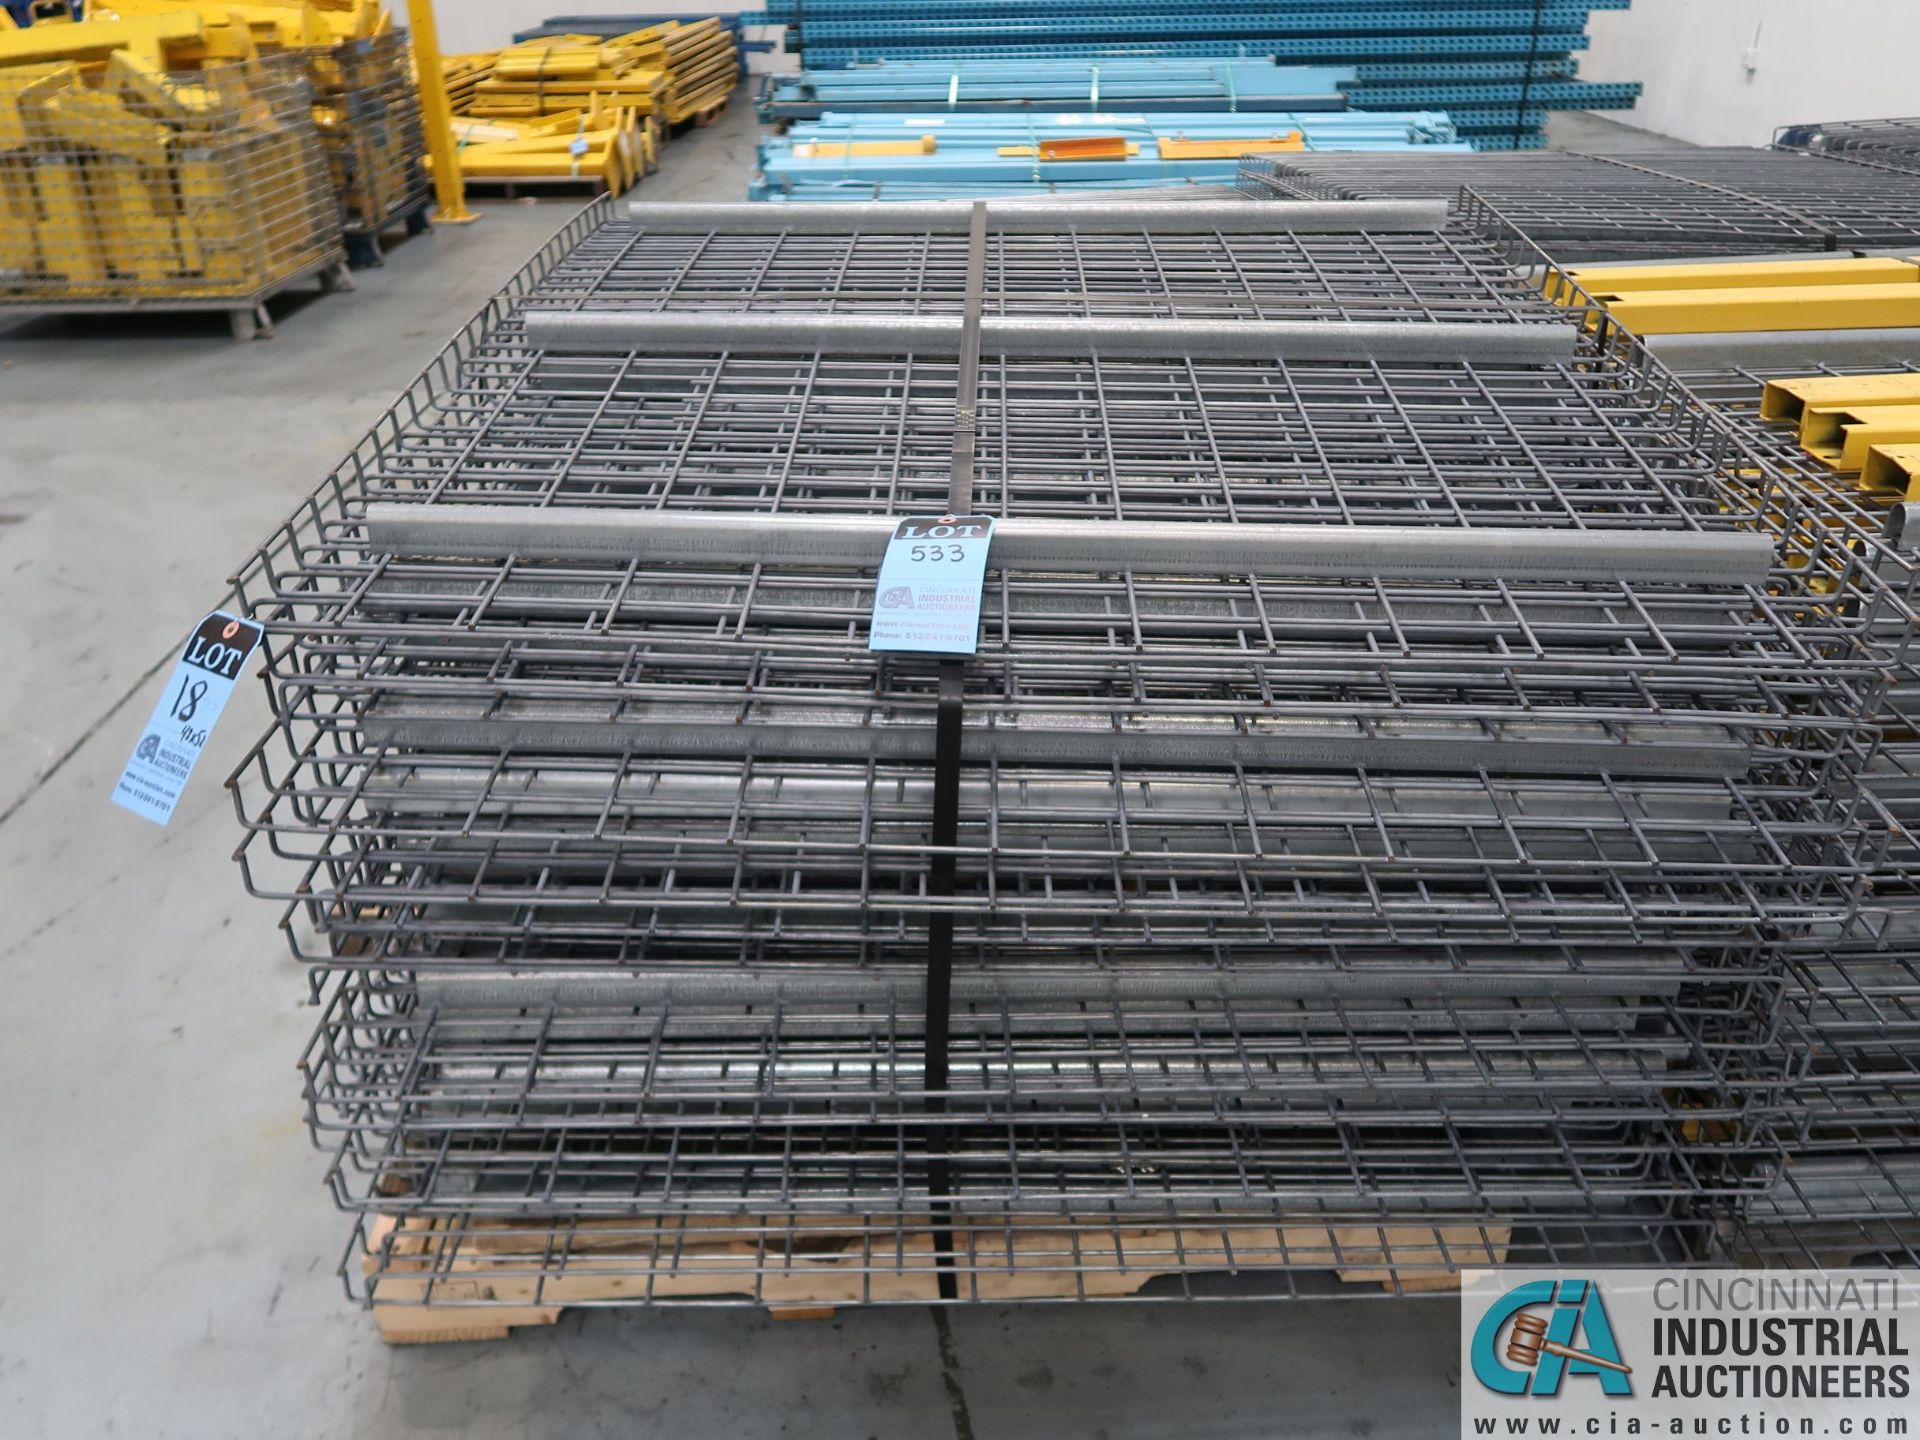 PIECES 48" X 52" PALLET RACK WIRE DECKING *$25.00 RIGGING FEE DUE TO INDUSTRIAL SERVICES AND SALES*